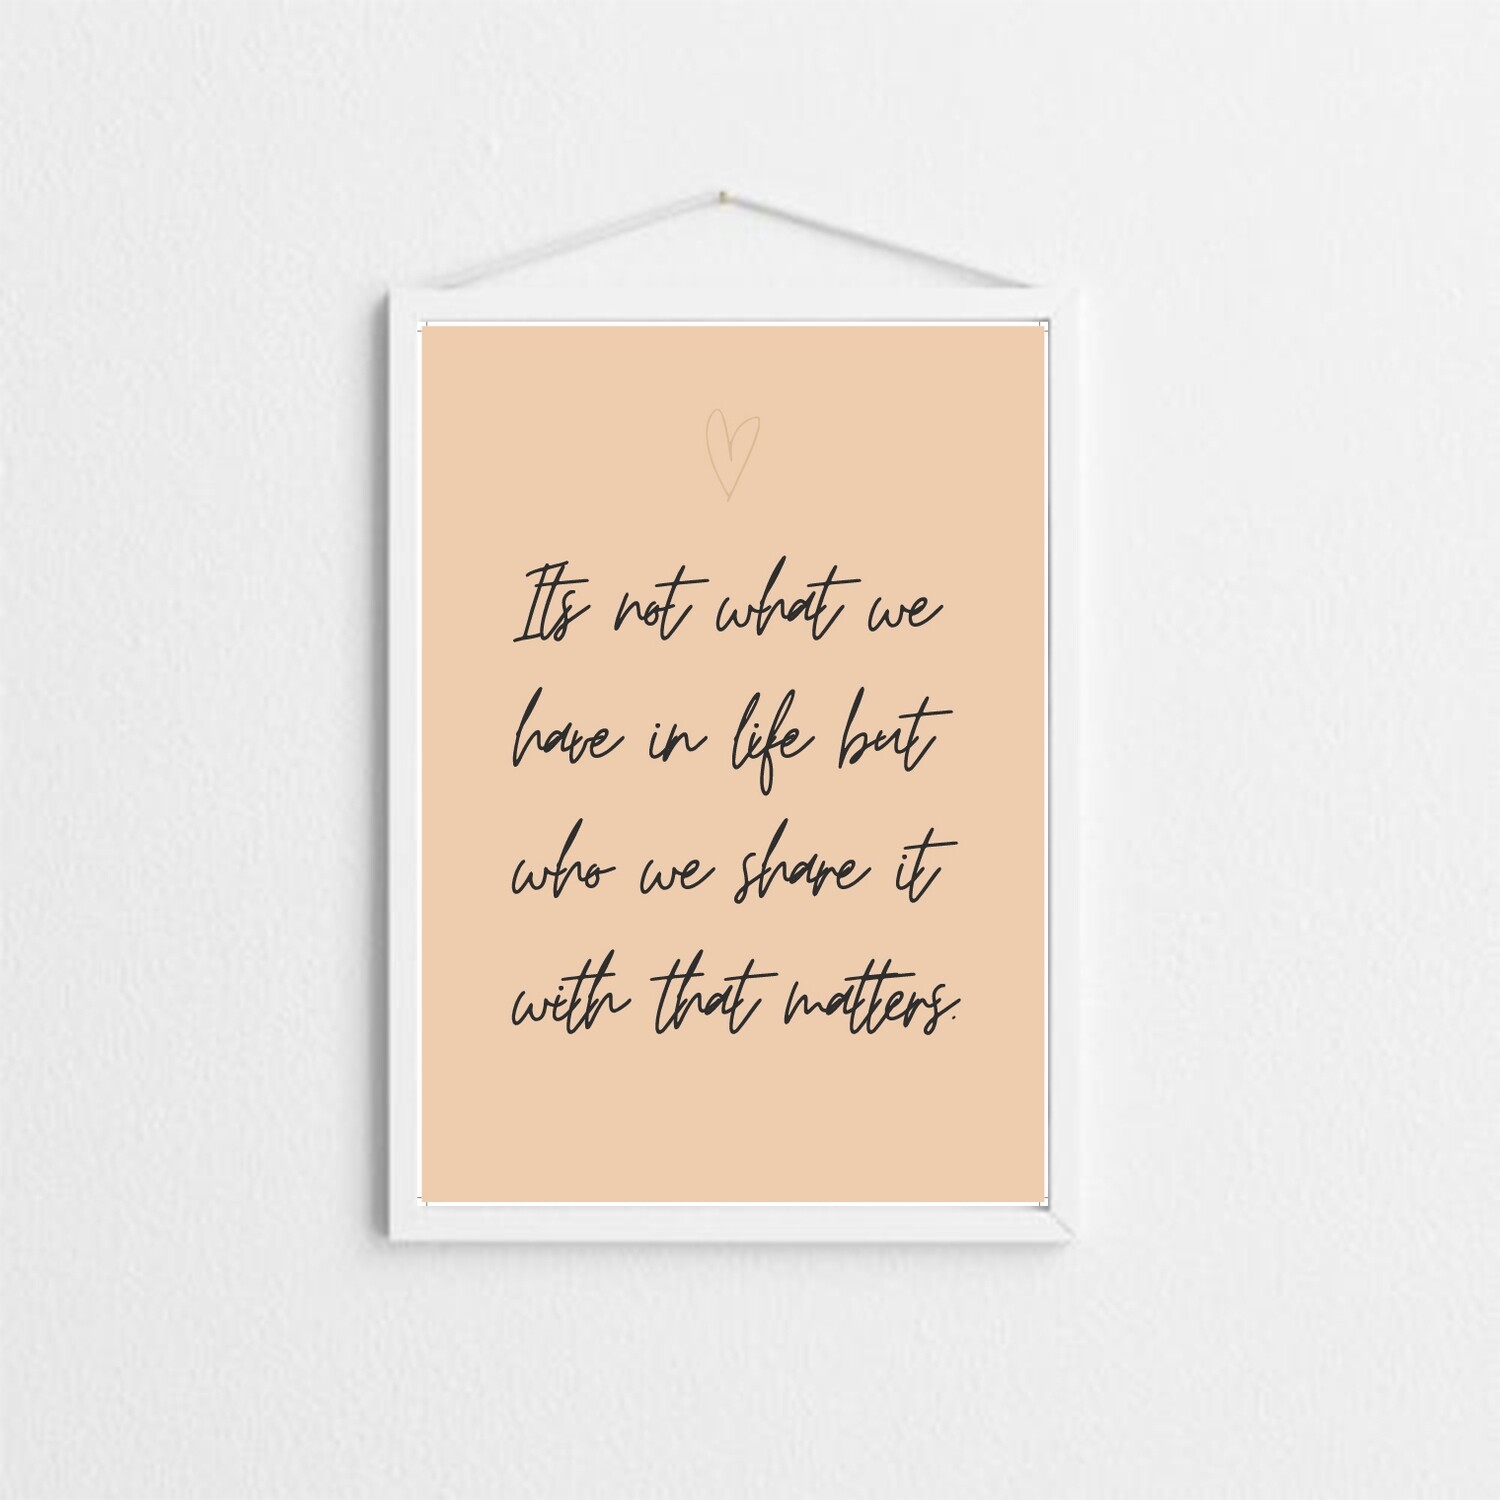 Its not what we have in life but who we share it with that matters art print